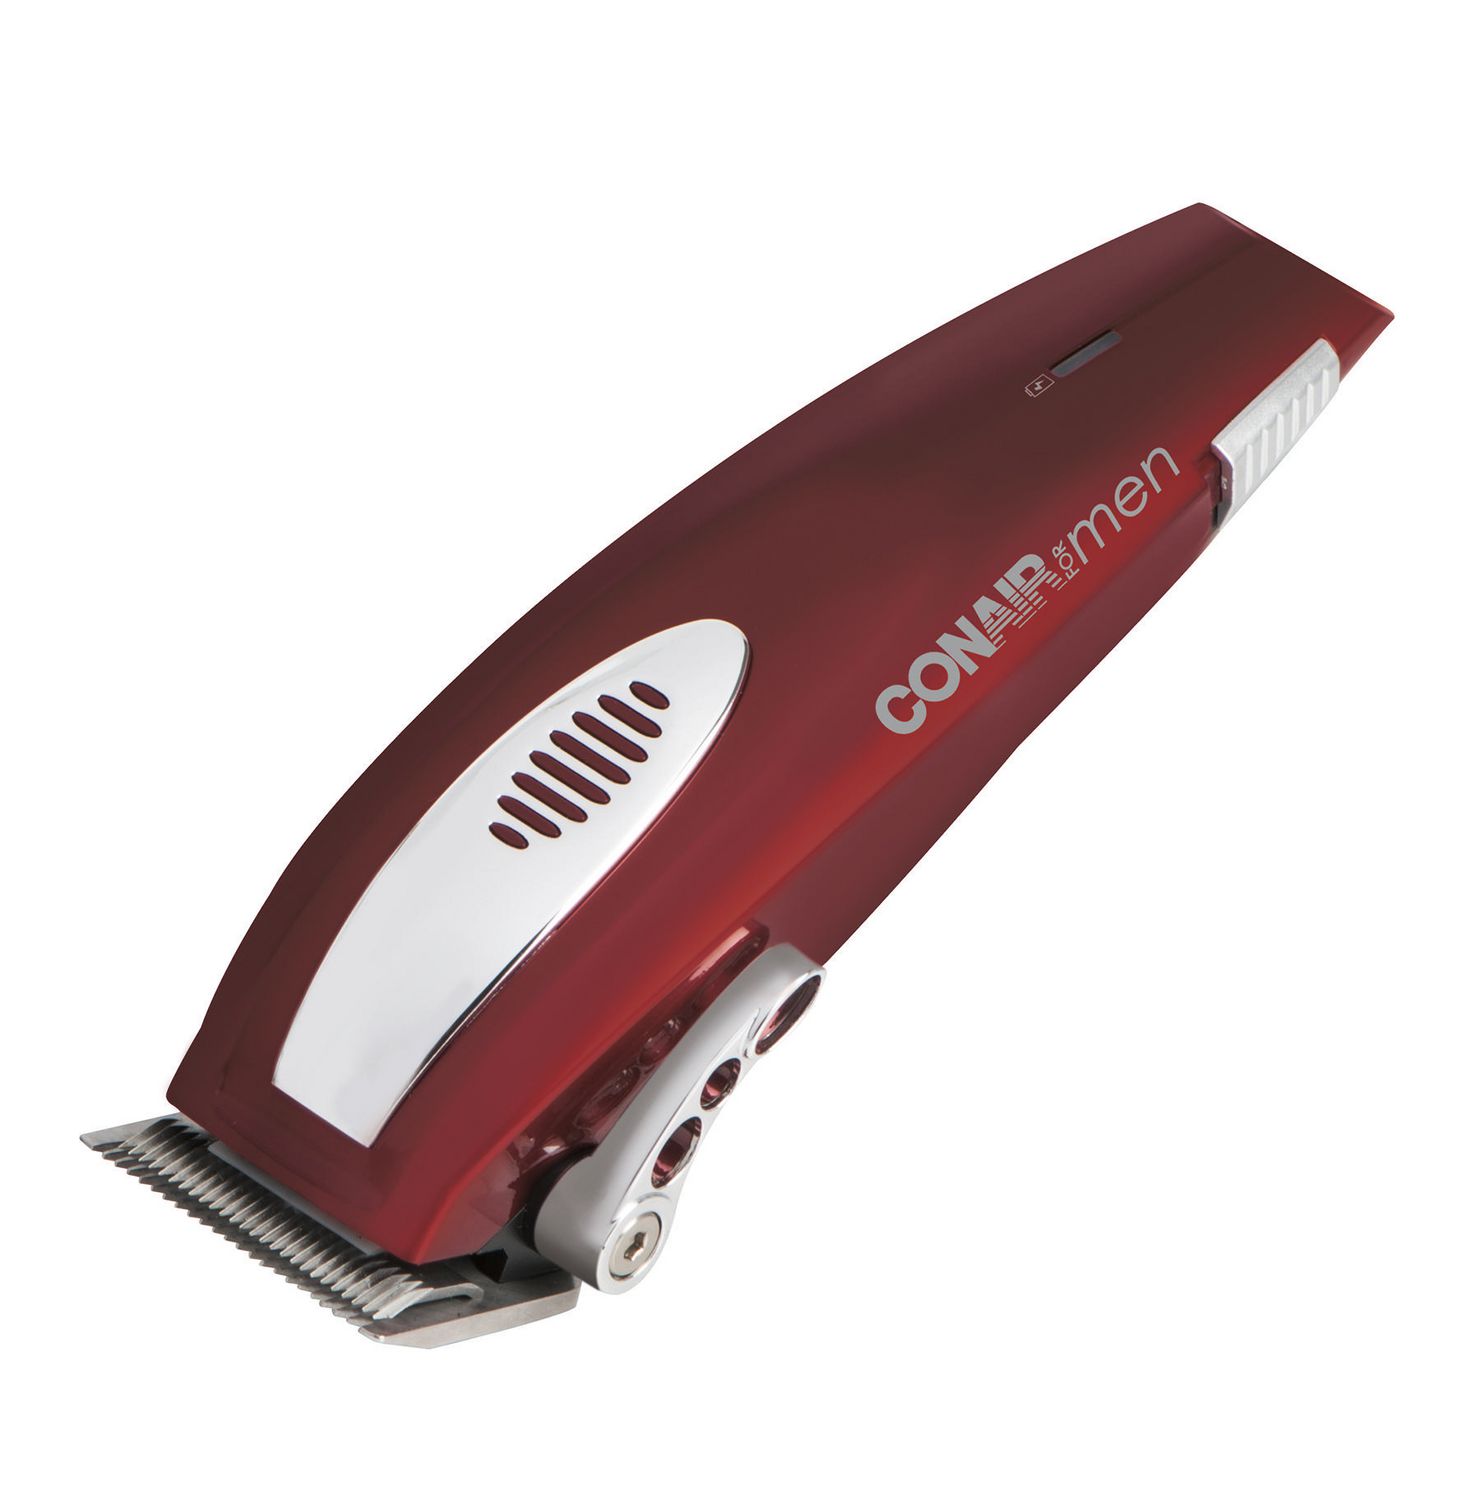 barber shop pro series by conair